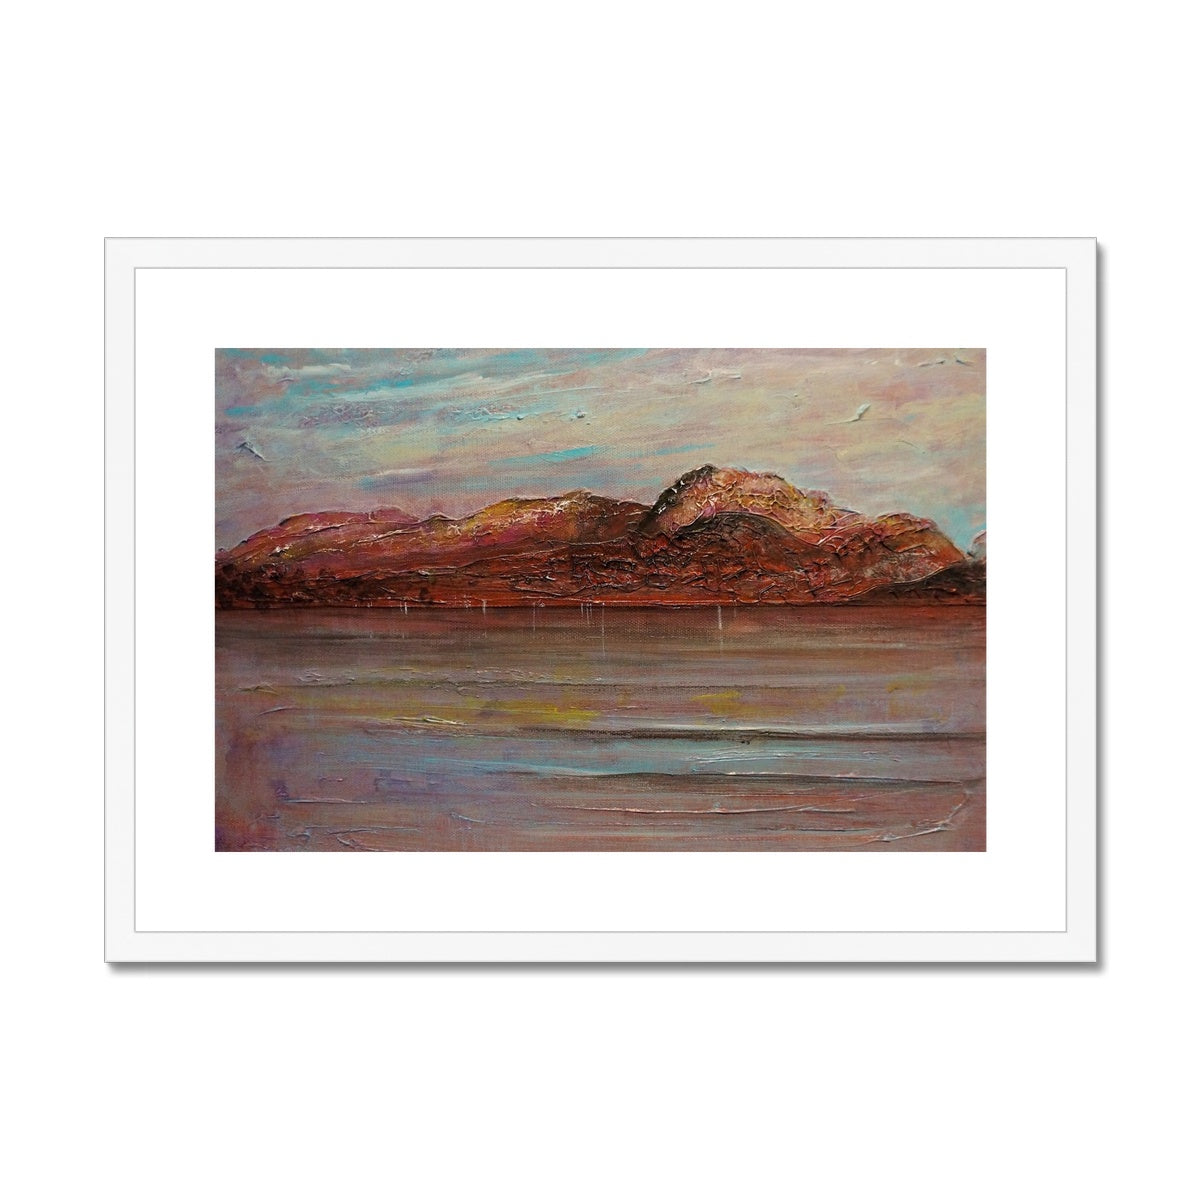 Ben Nevis Painting | Framed & Mounted Prints From Scotland-Framed & Mounted Prints-Scottish Lochs & Mountains Art Gallery-A2 Landscape-White Frame-Paintings, Prints, Homeware, Art Gifts From Scotland By Scottish Artist Kevin Hunter